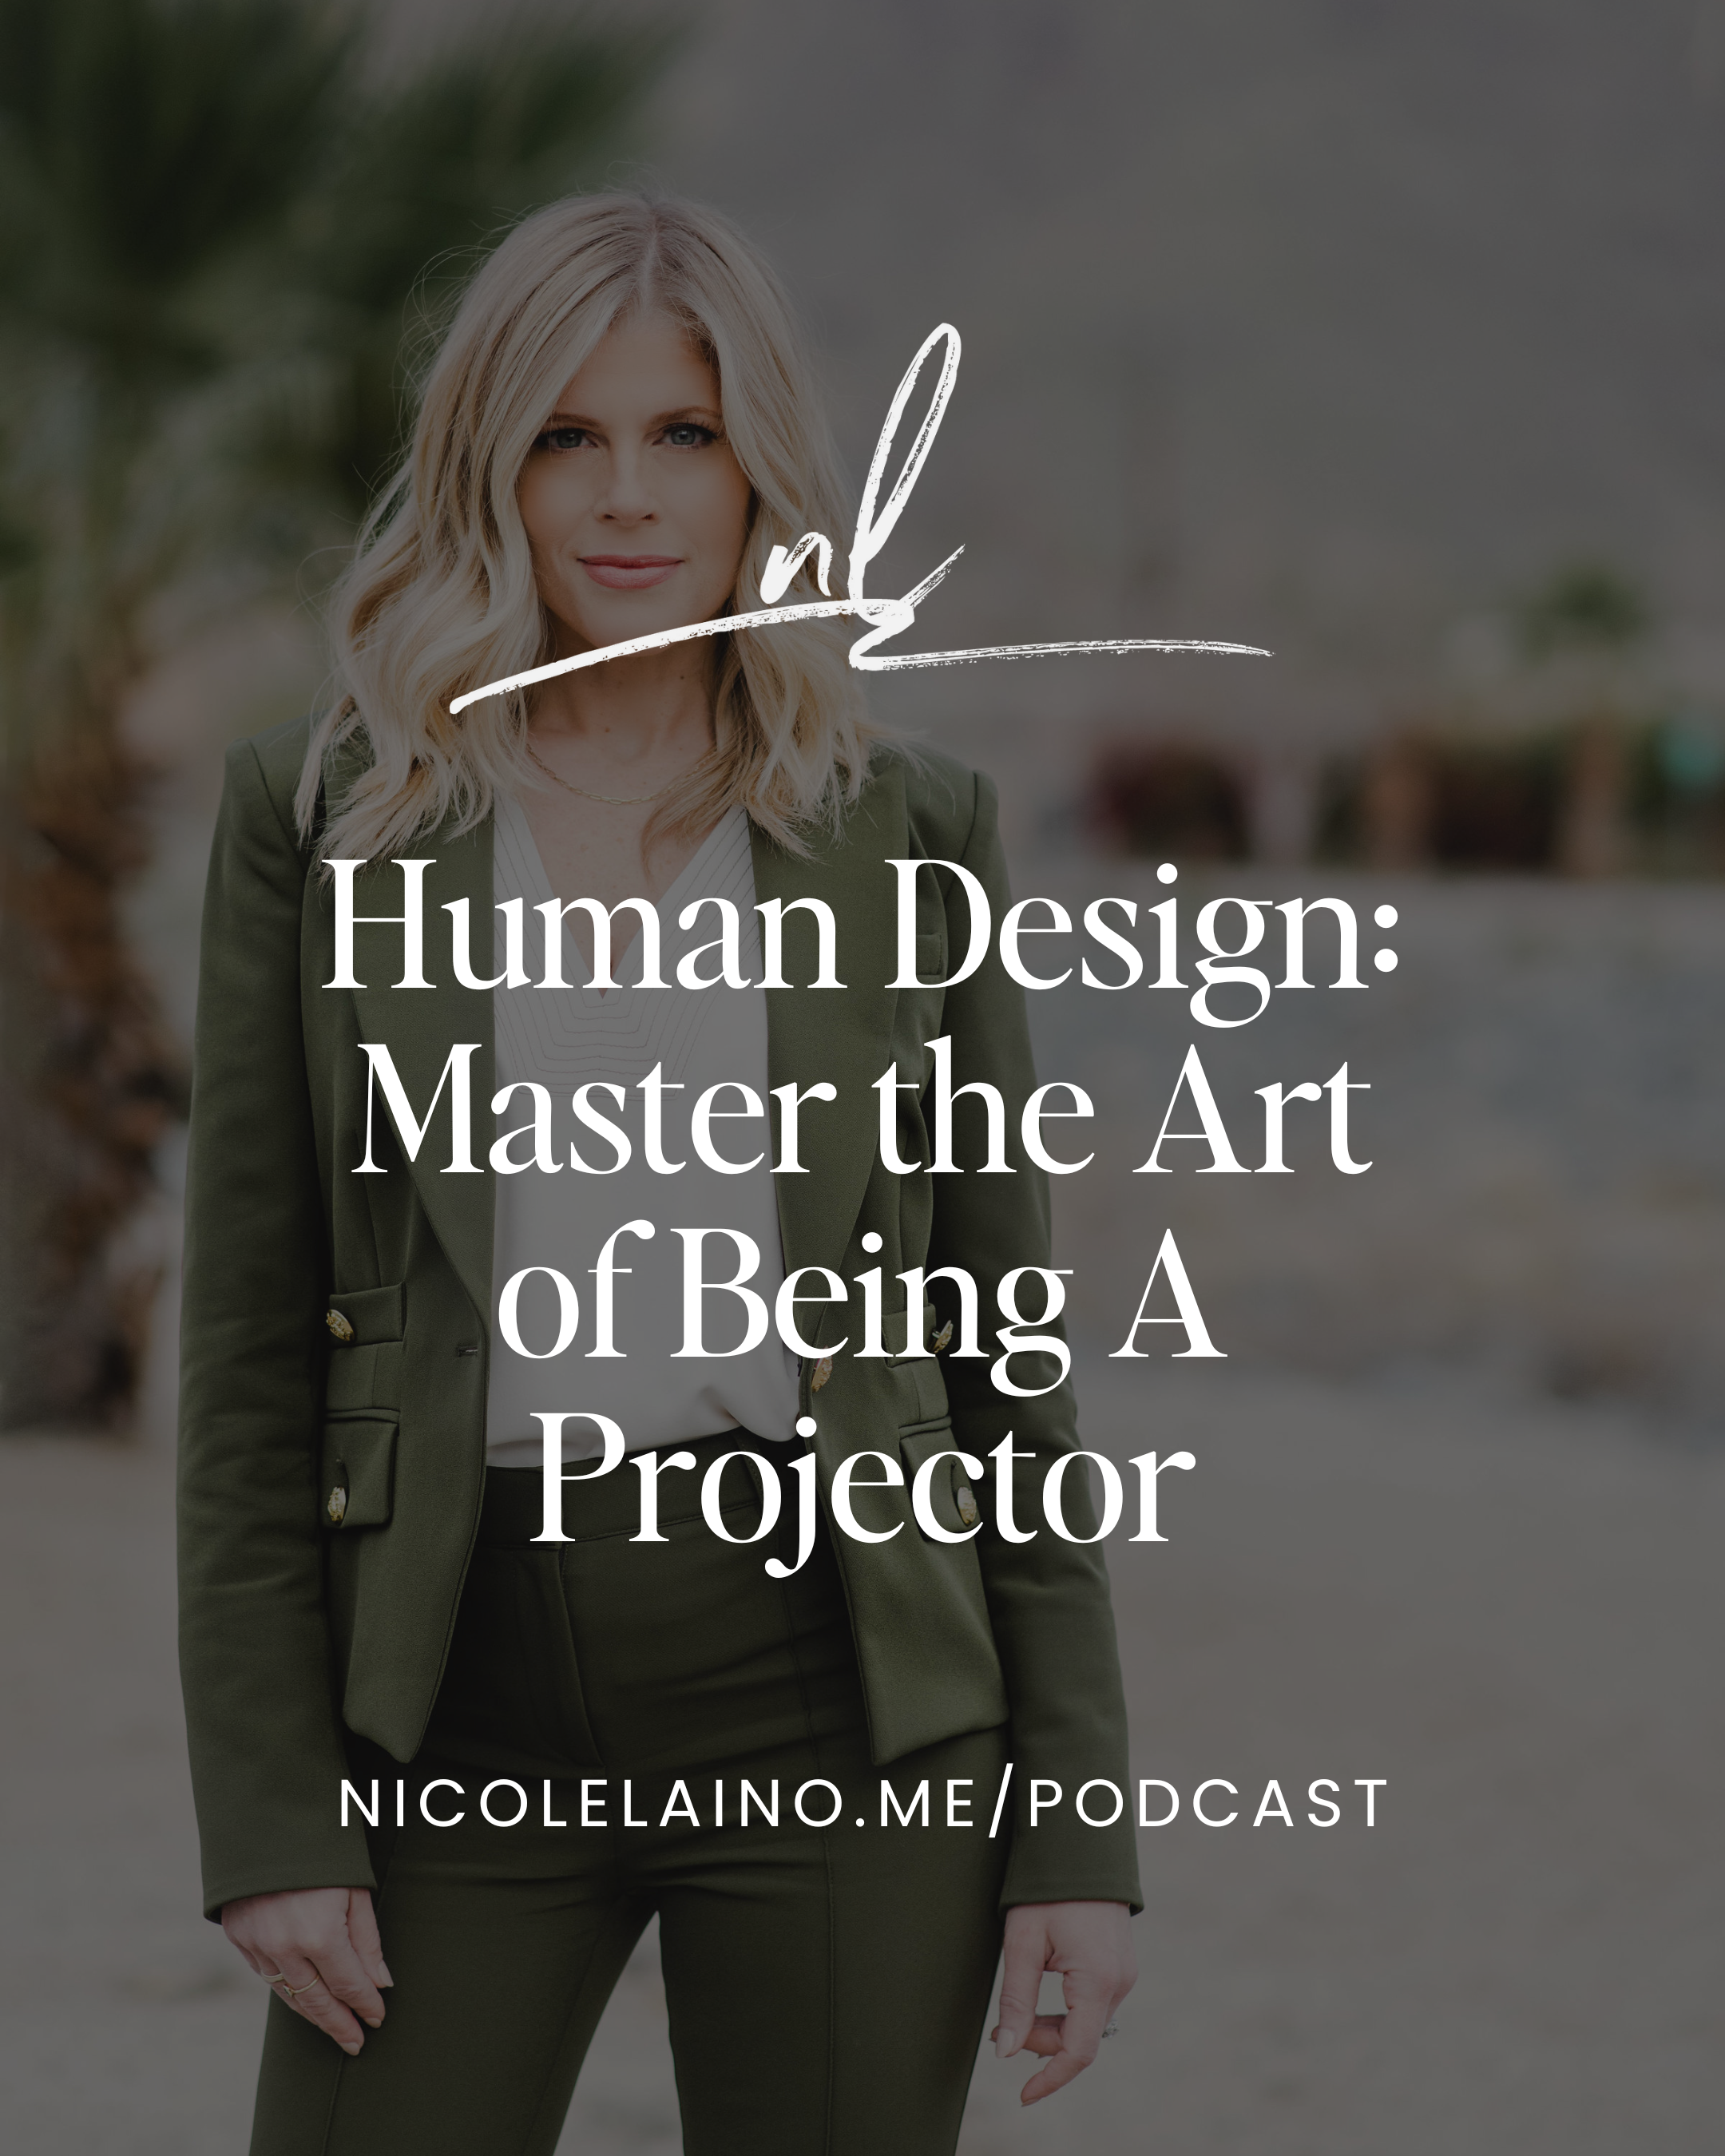 Human Design: Master the Art of Being A Projector